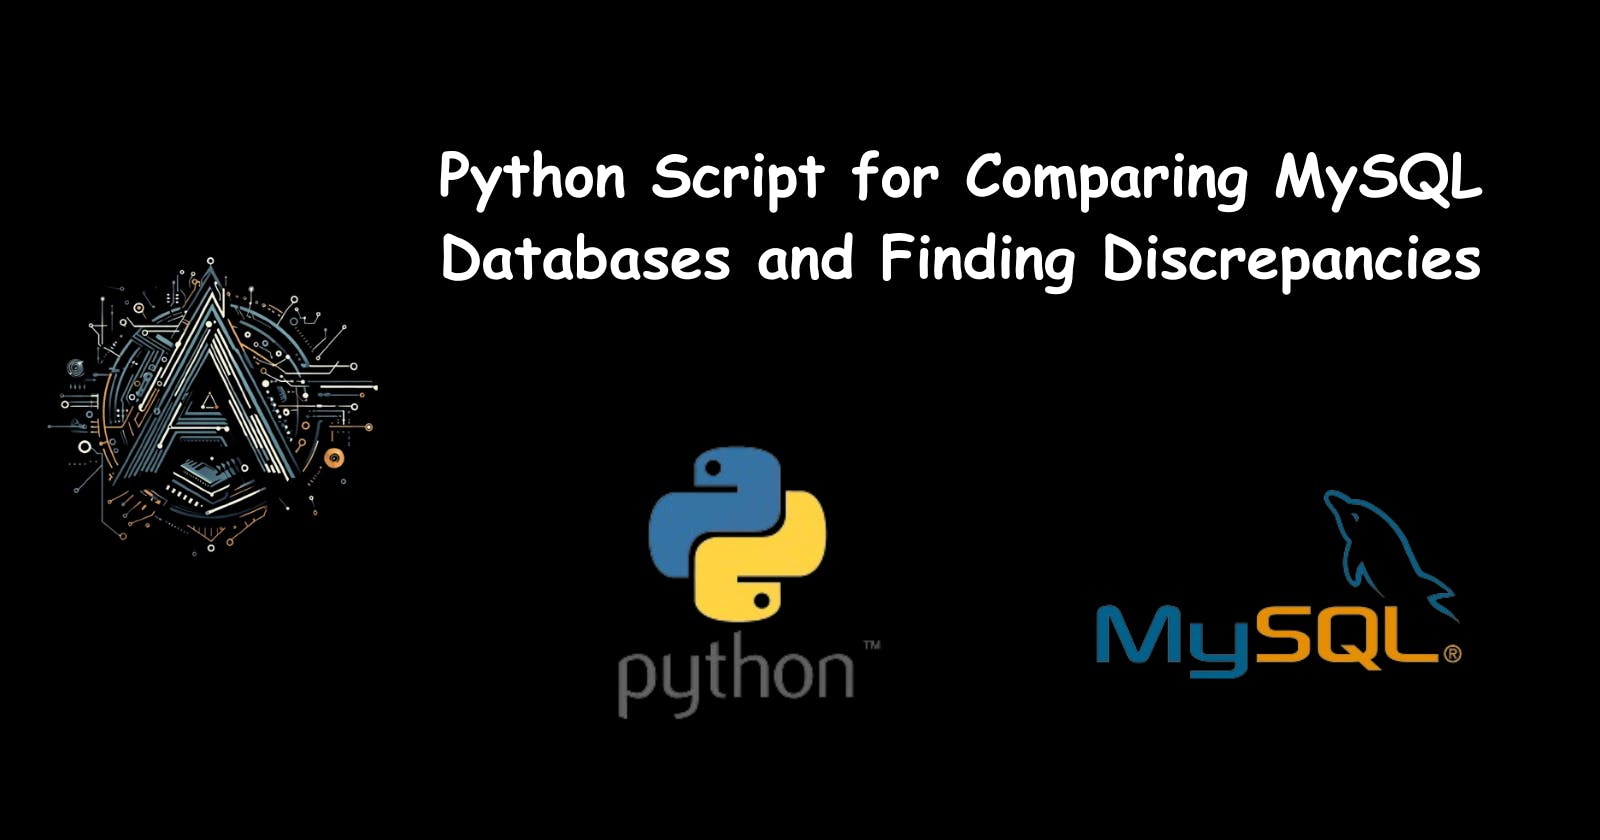 Python Script for Comparing MySQL Databases and Finding Discrepancies